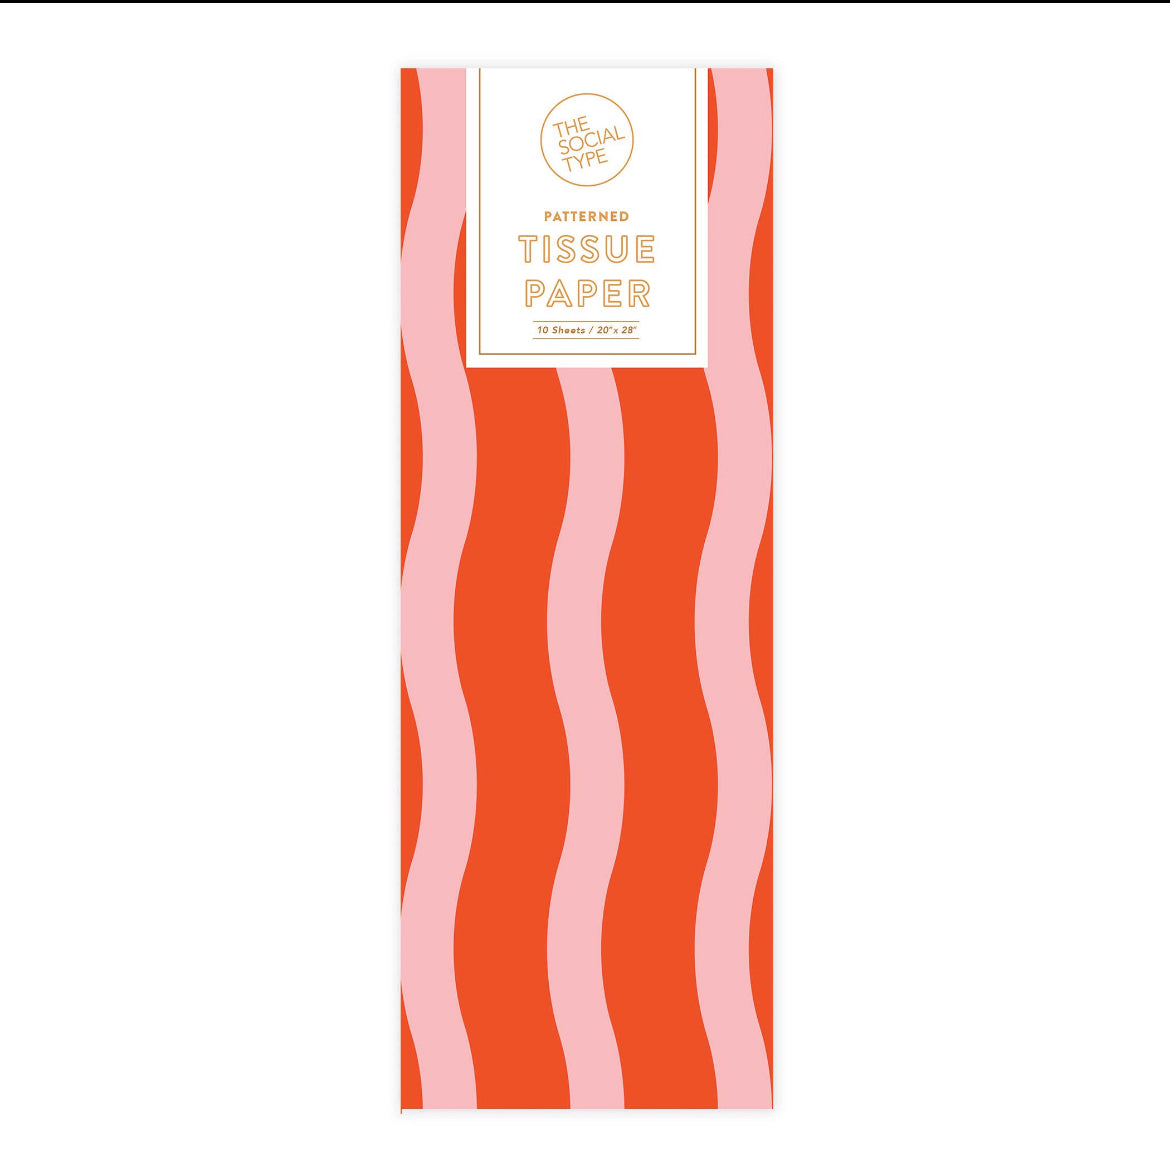 Striped tissues paper